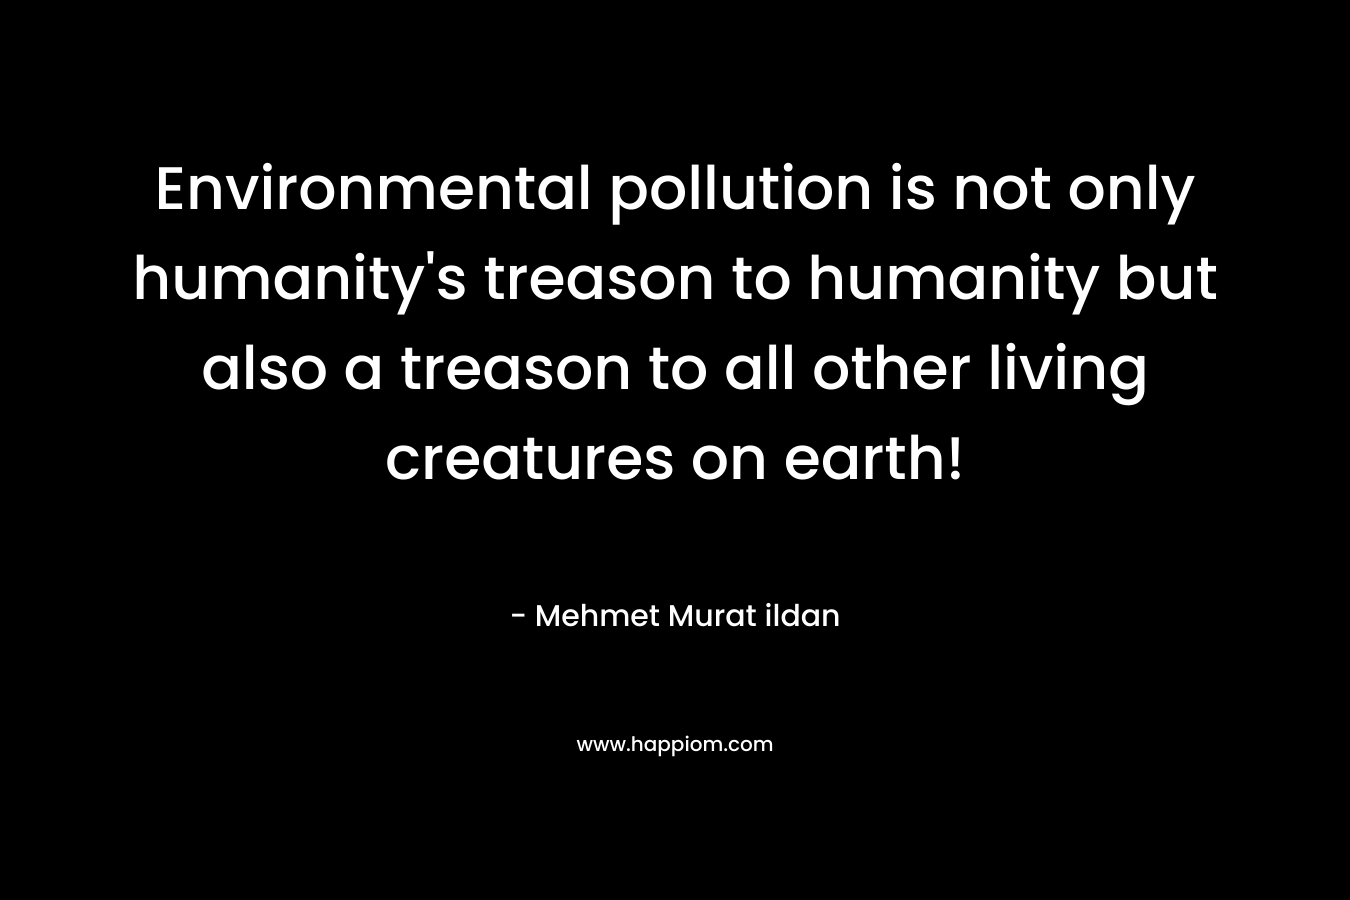 Environmental pollution is not only humanity’s treason to humanity but also a treason to all other living creatures on earth! – Mehmet Murat ildan